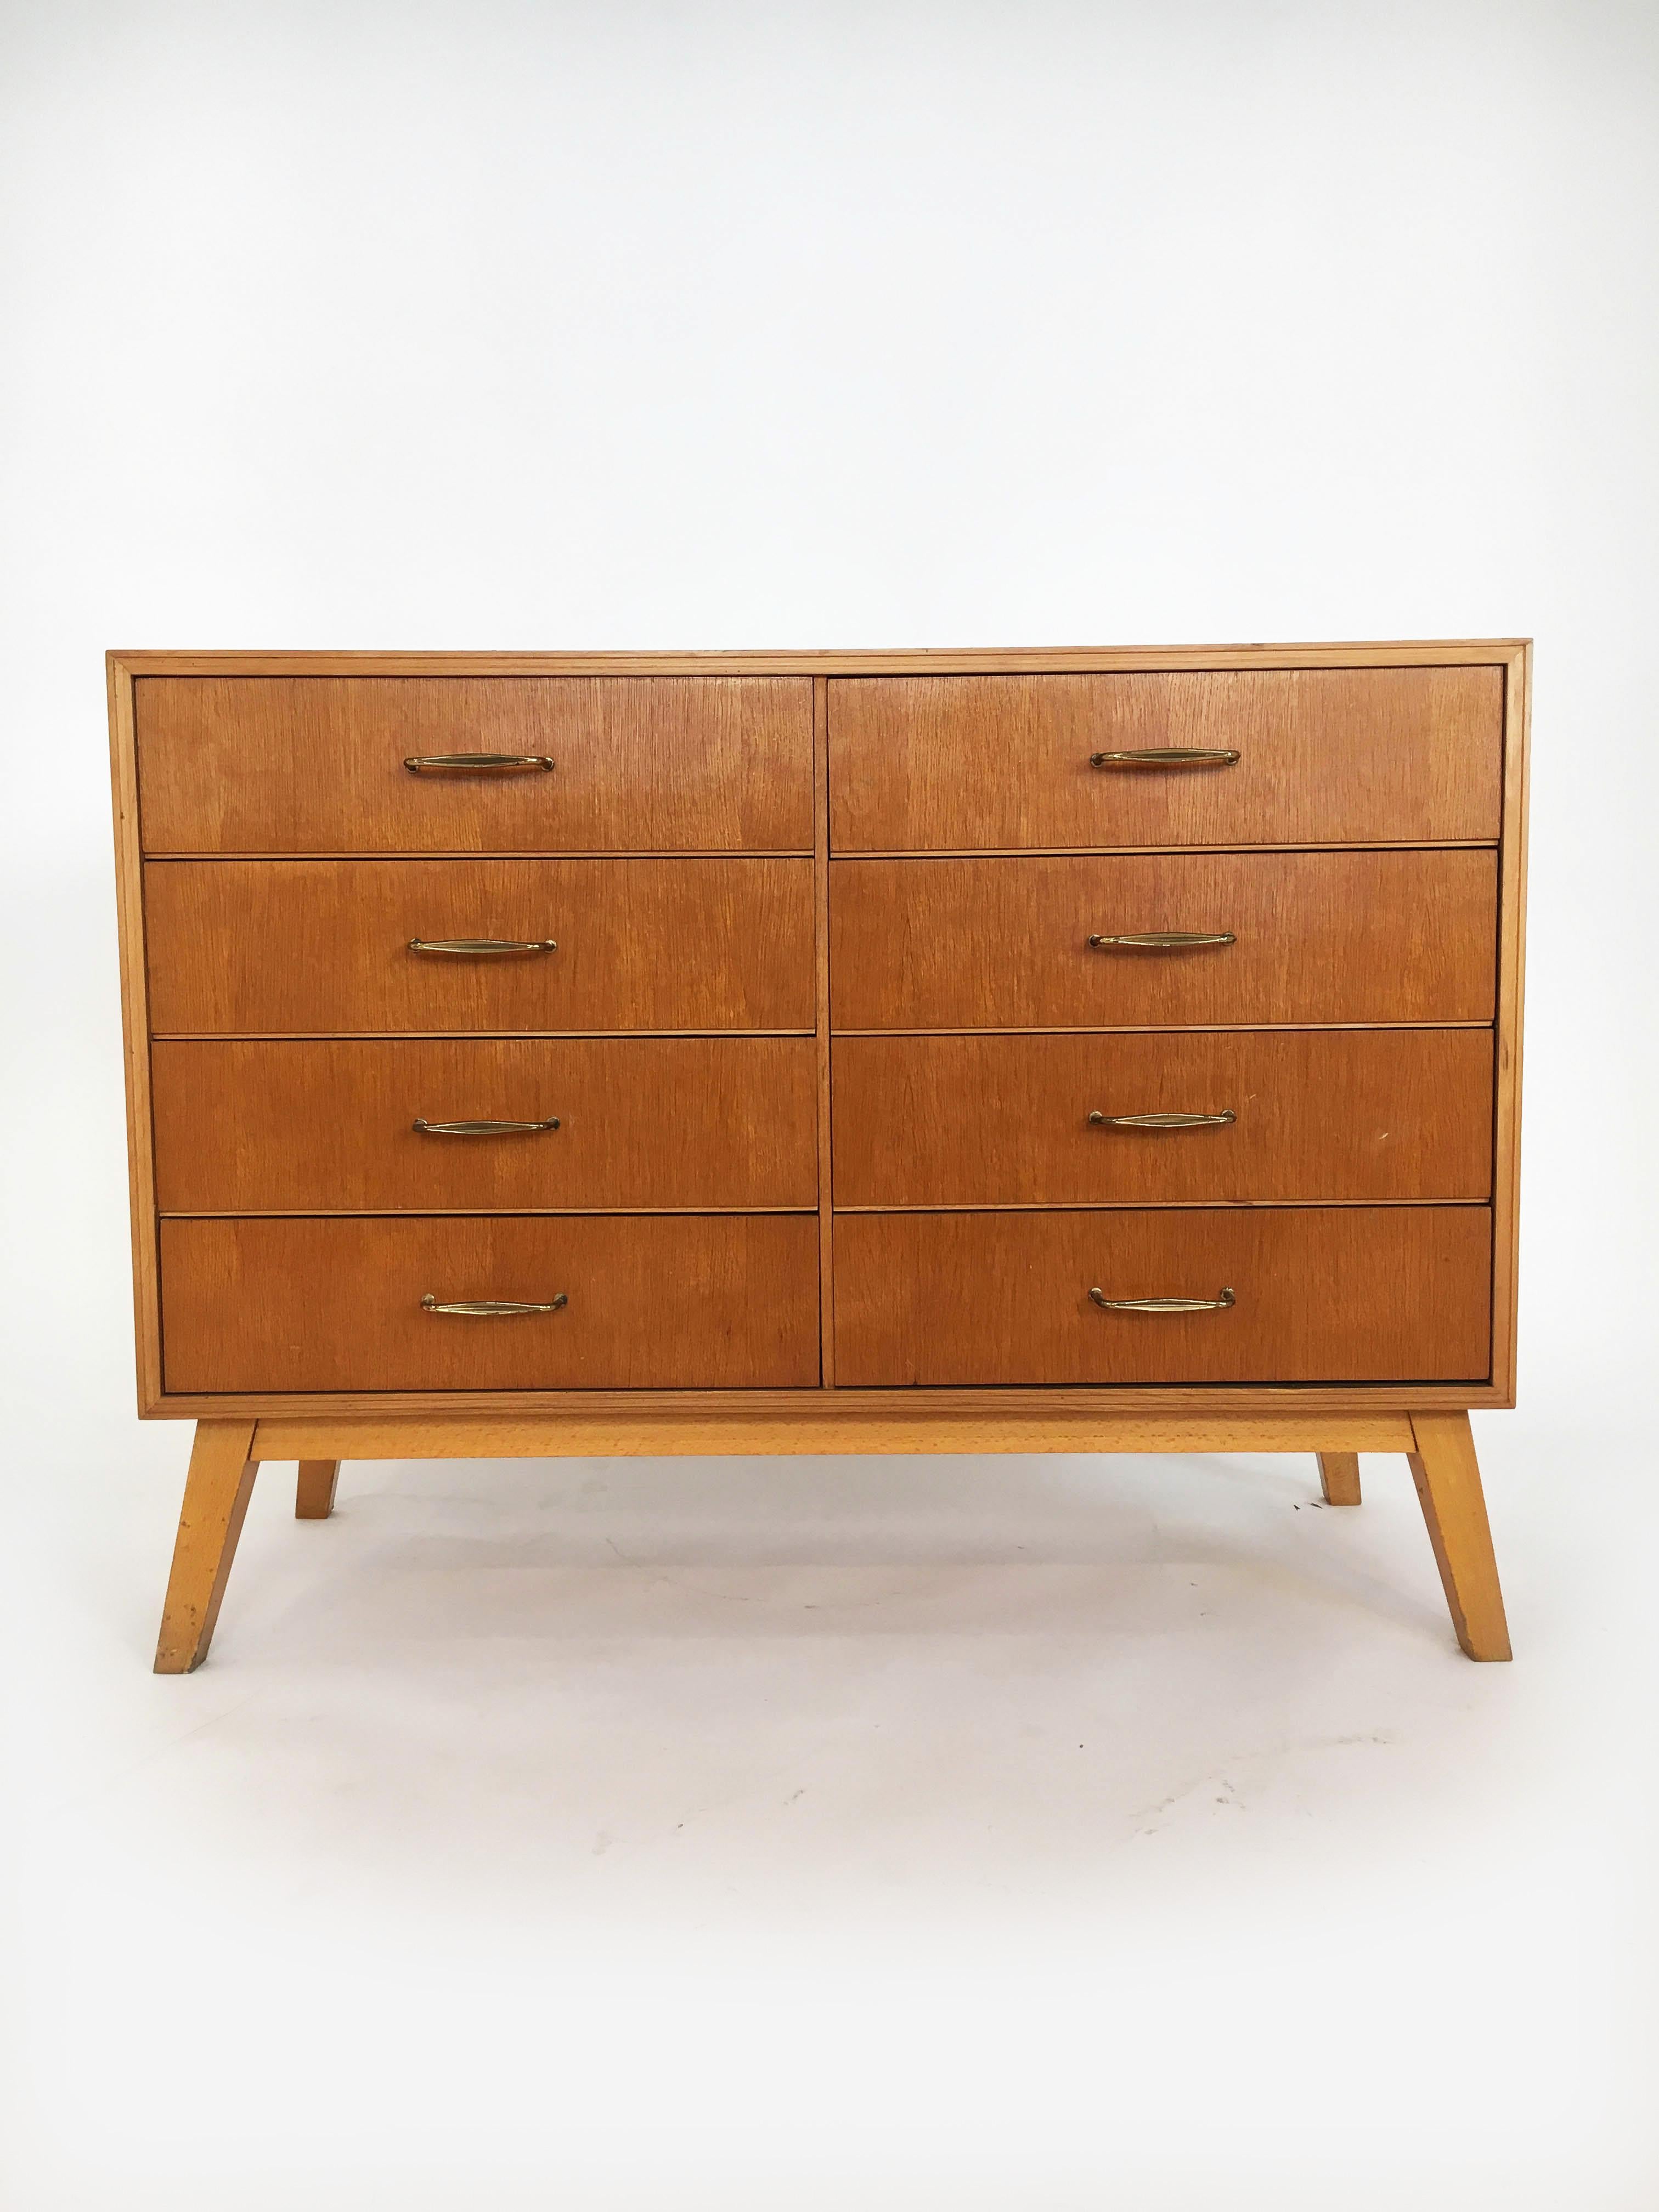 SW Möbel Sideboard, Chest of Drawers, Bookcase Collection, Vienna, 1950s For Sale 2